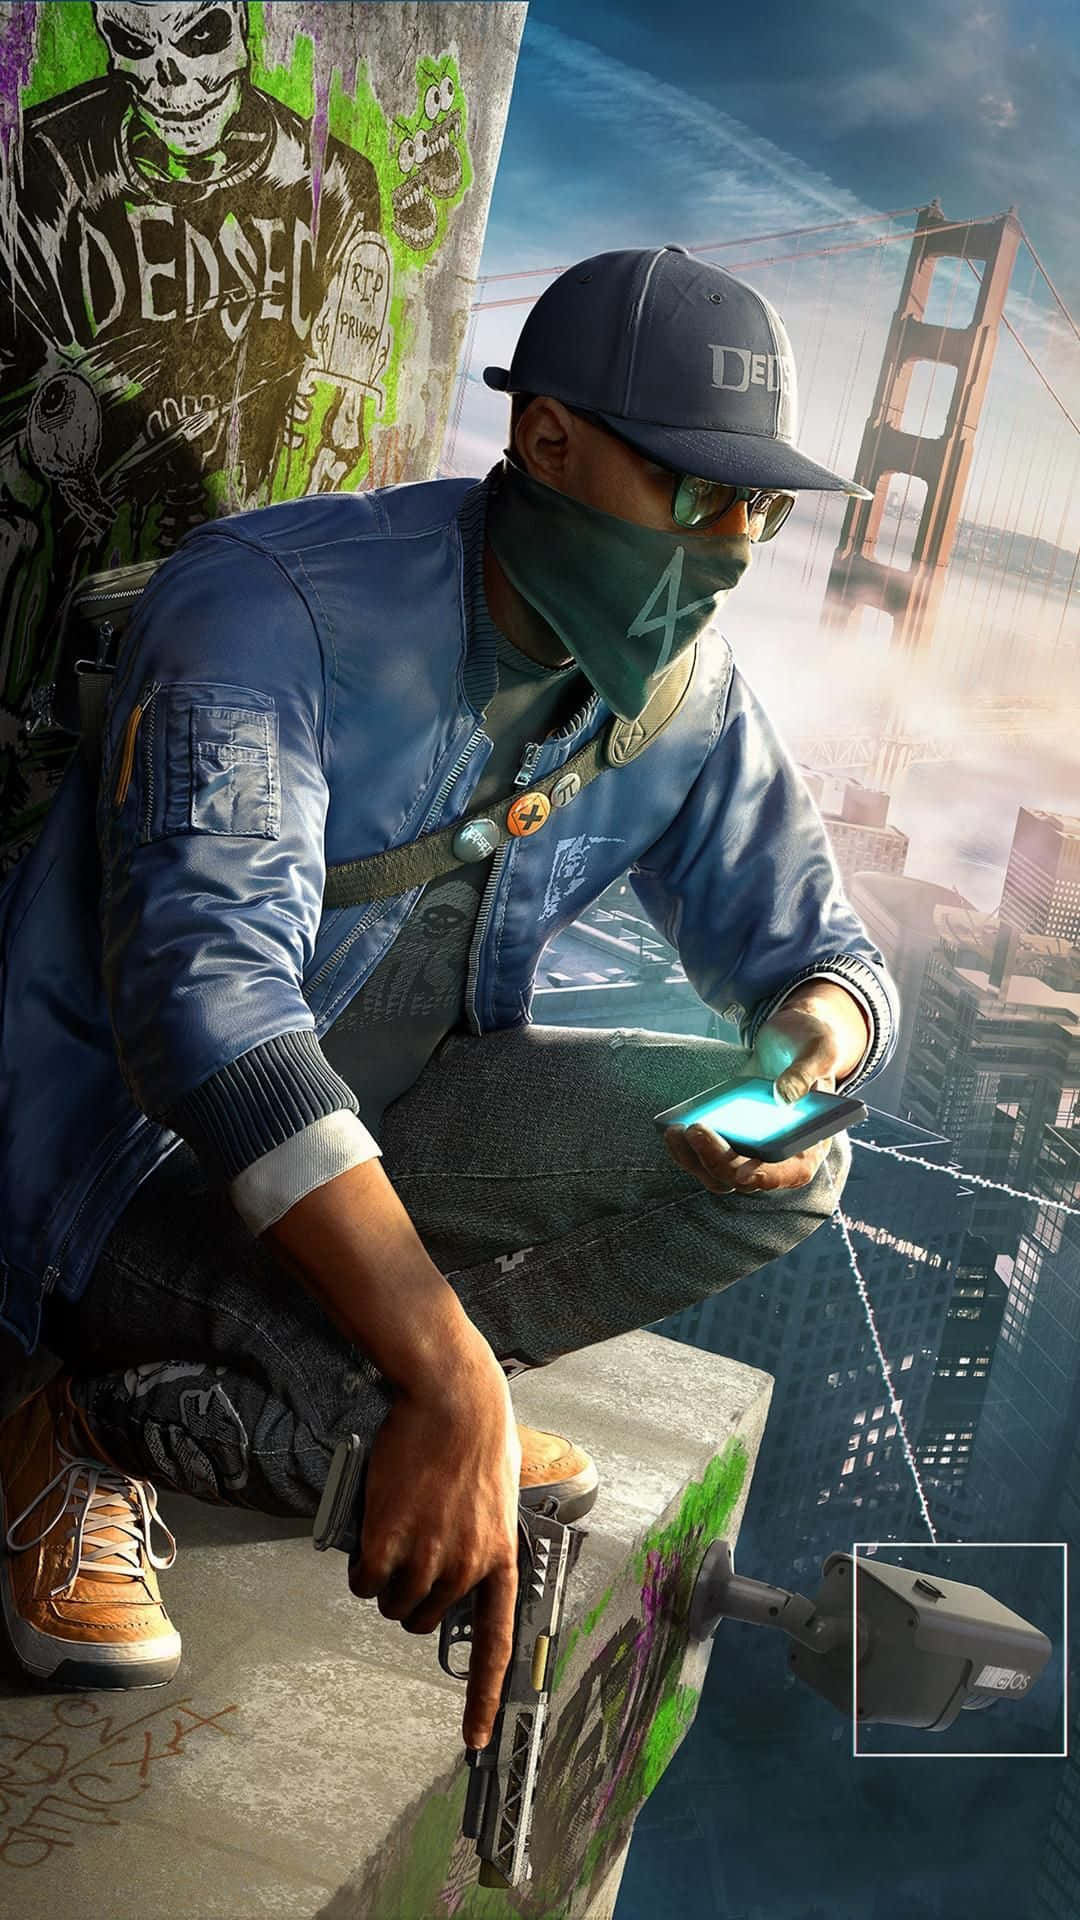 Man With Mask Watch Dogs Iphone Wallpaper